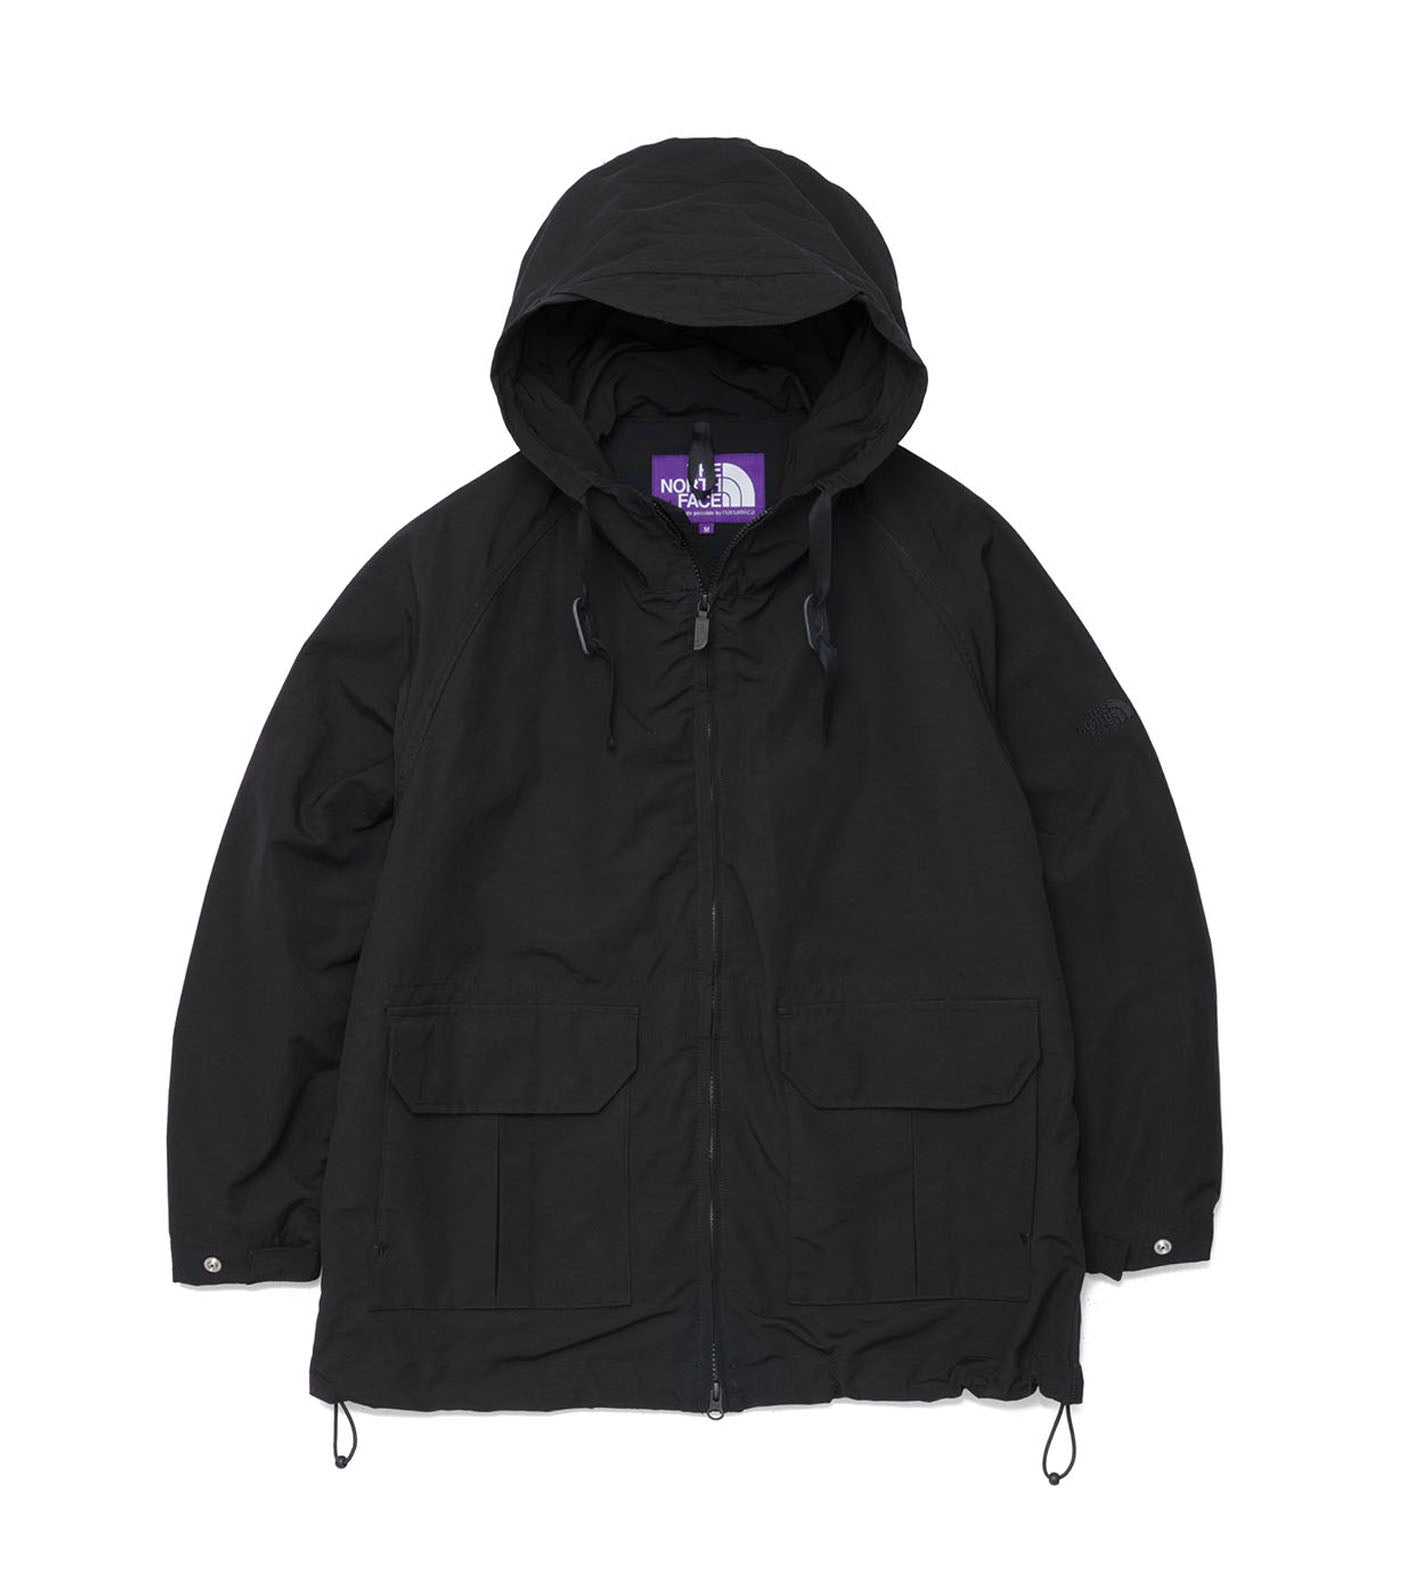 THE NORTH FACE Mountain Wind Parka ジャンパー/ブルゾン 店舗限定